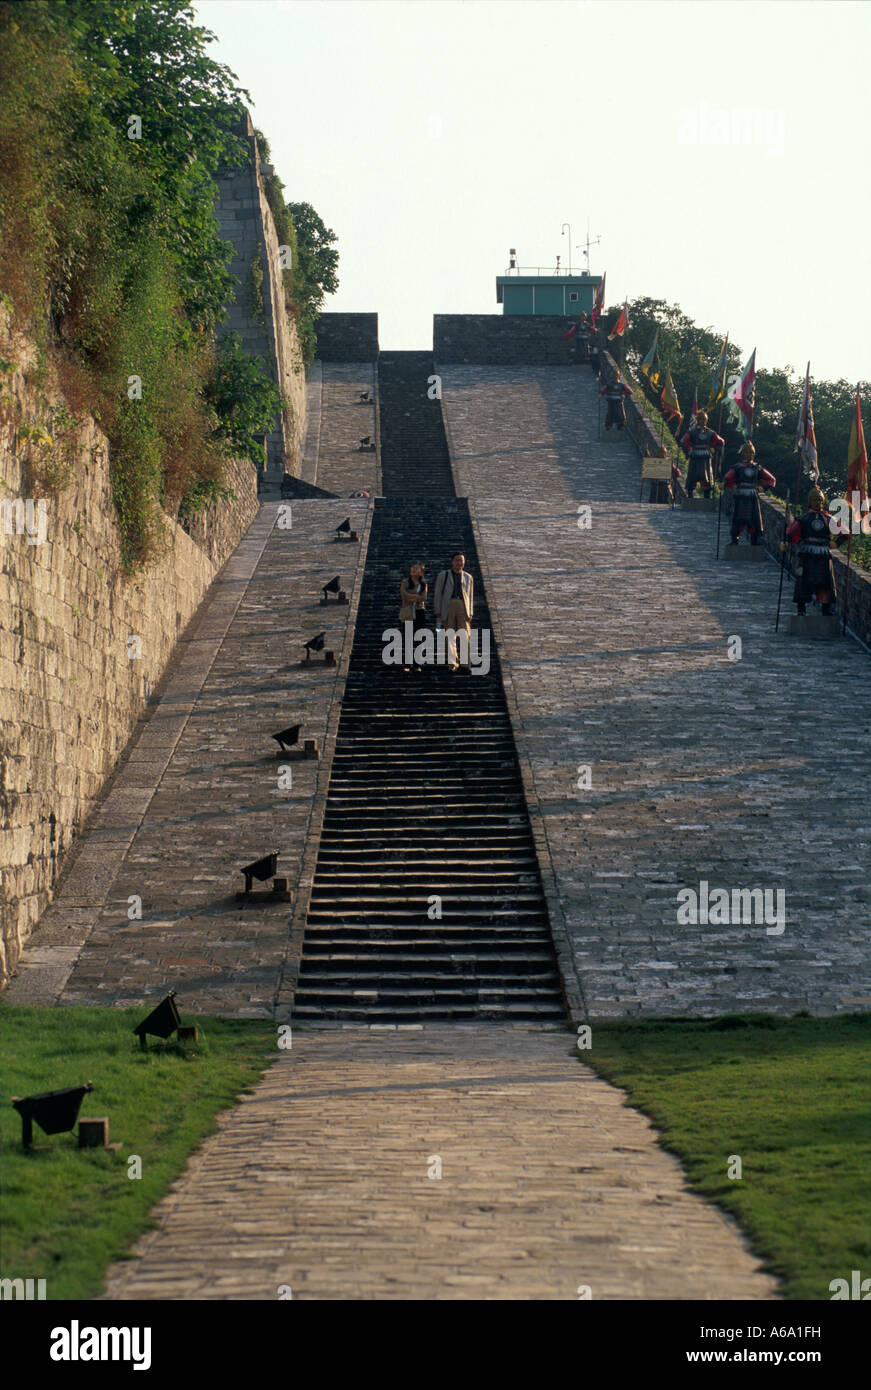 China, Jiangsu, Nanjing, Zhonghua Gate, visitors on steps of wide stonework ramp, lined with statues of soldiers Stock Photo